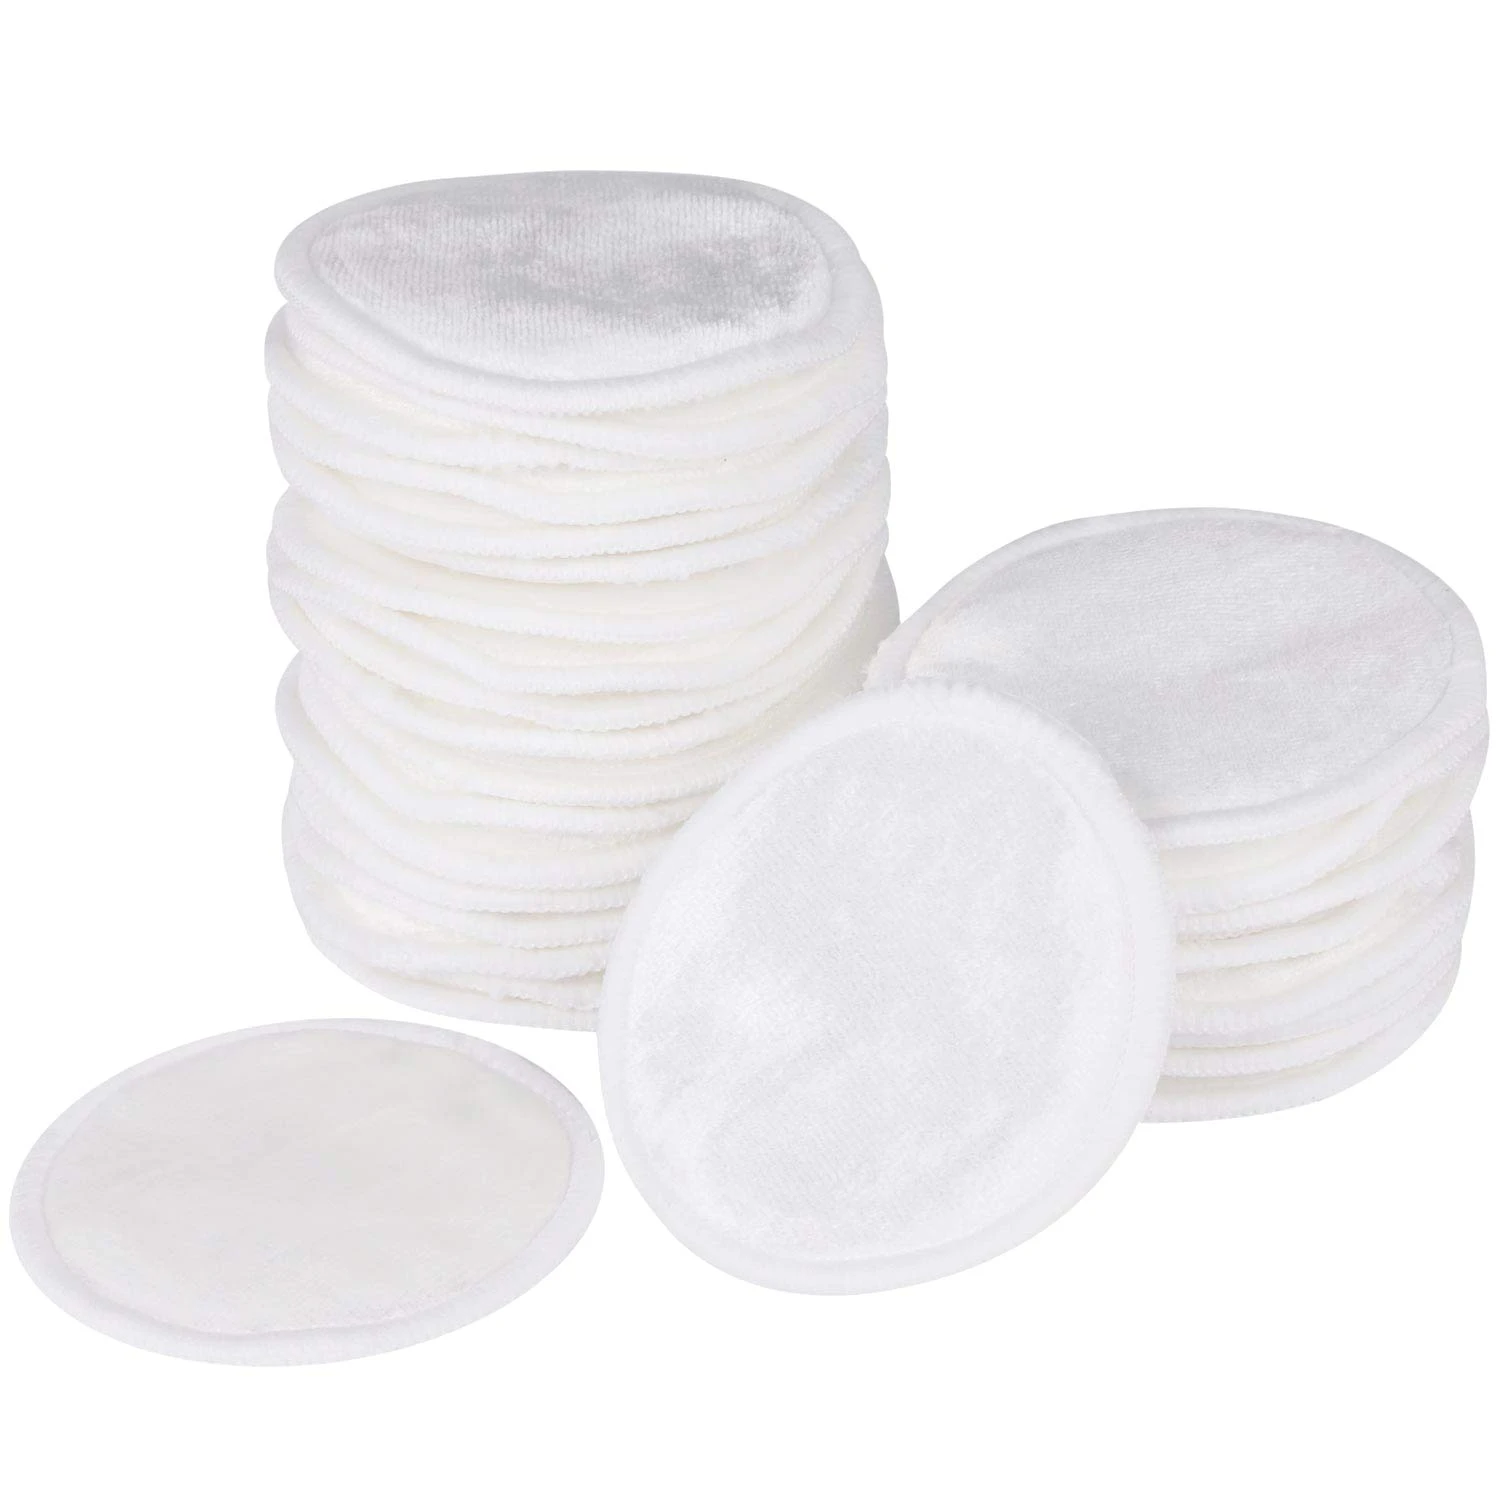 Factory Price Wholesale washable organic Facial Face Cleansing pads Reusable Bamboo Makeup Remover Pads with custom logo package